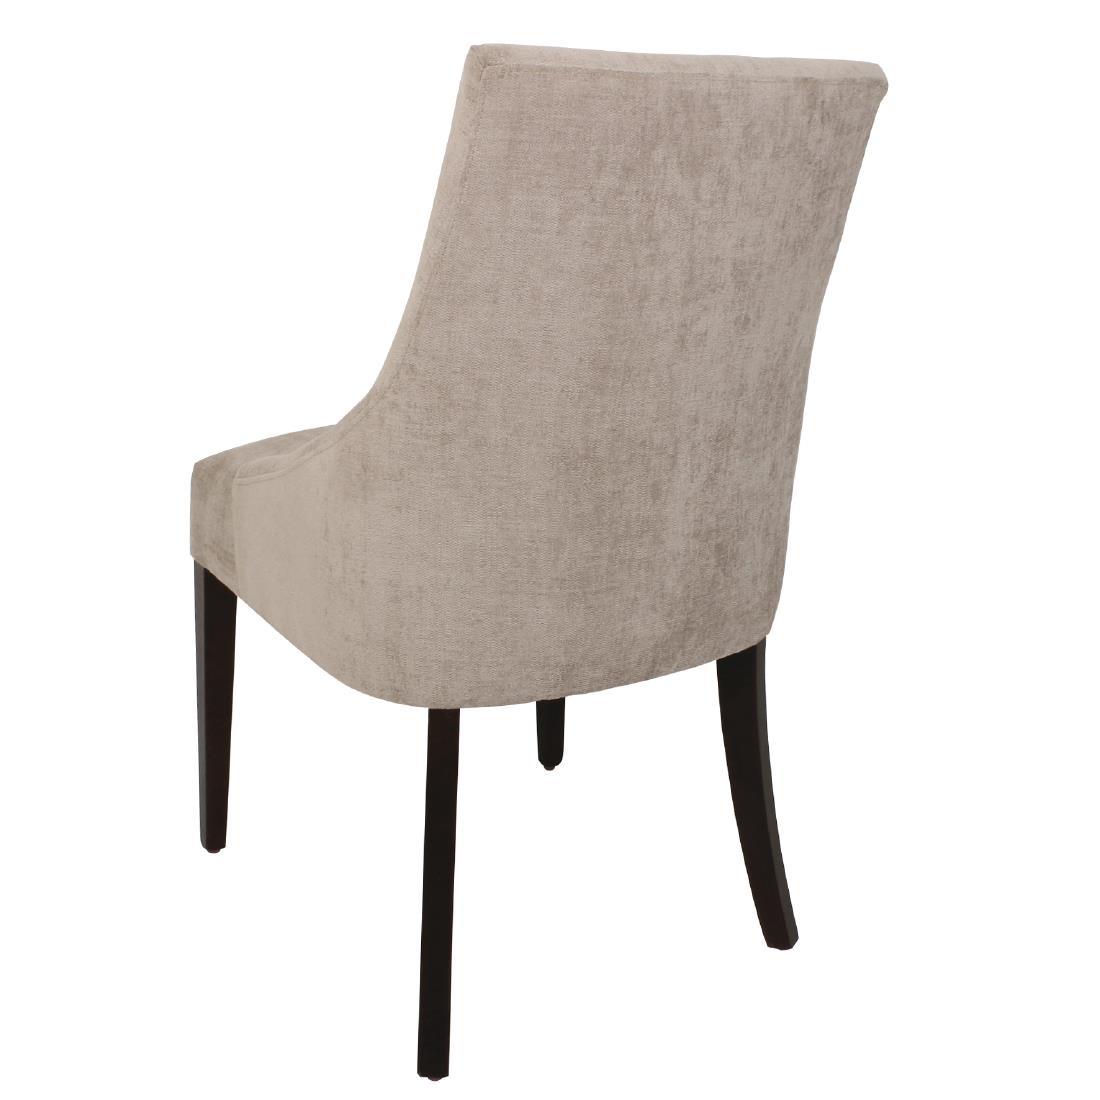 Bolero Neutral Finesse Dining Chairs (Pack of 2) - CF367  - 3